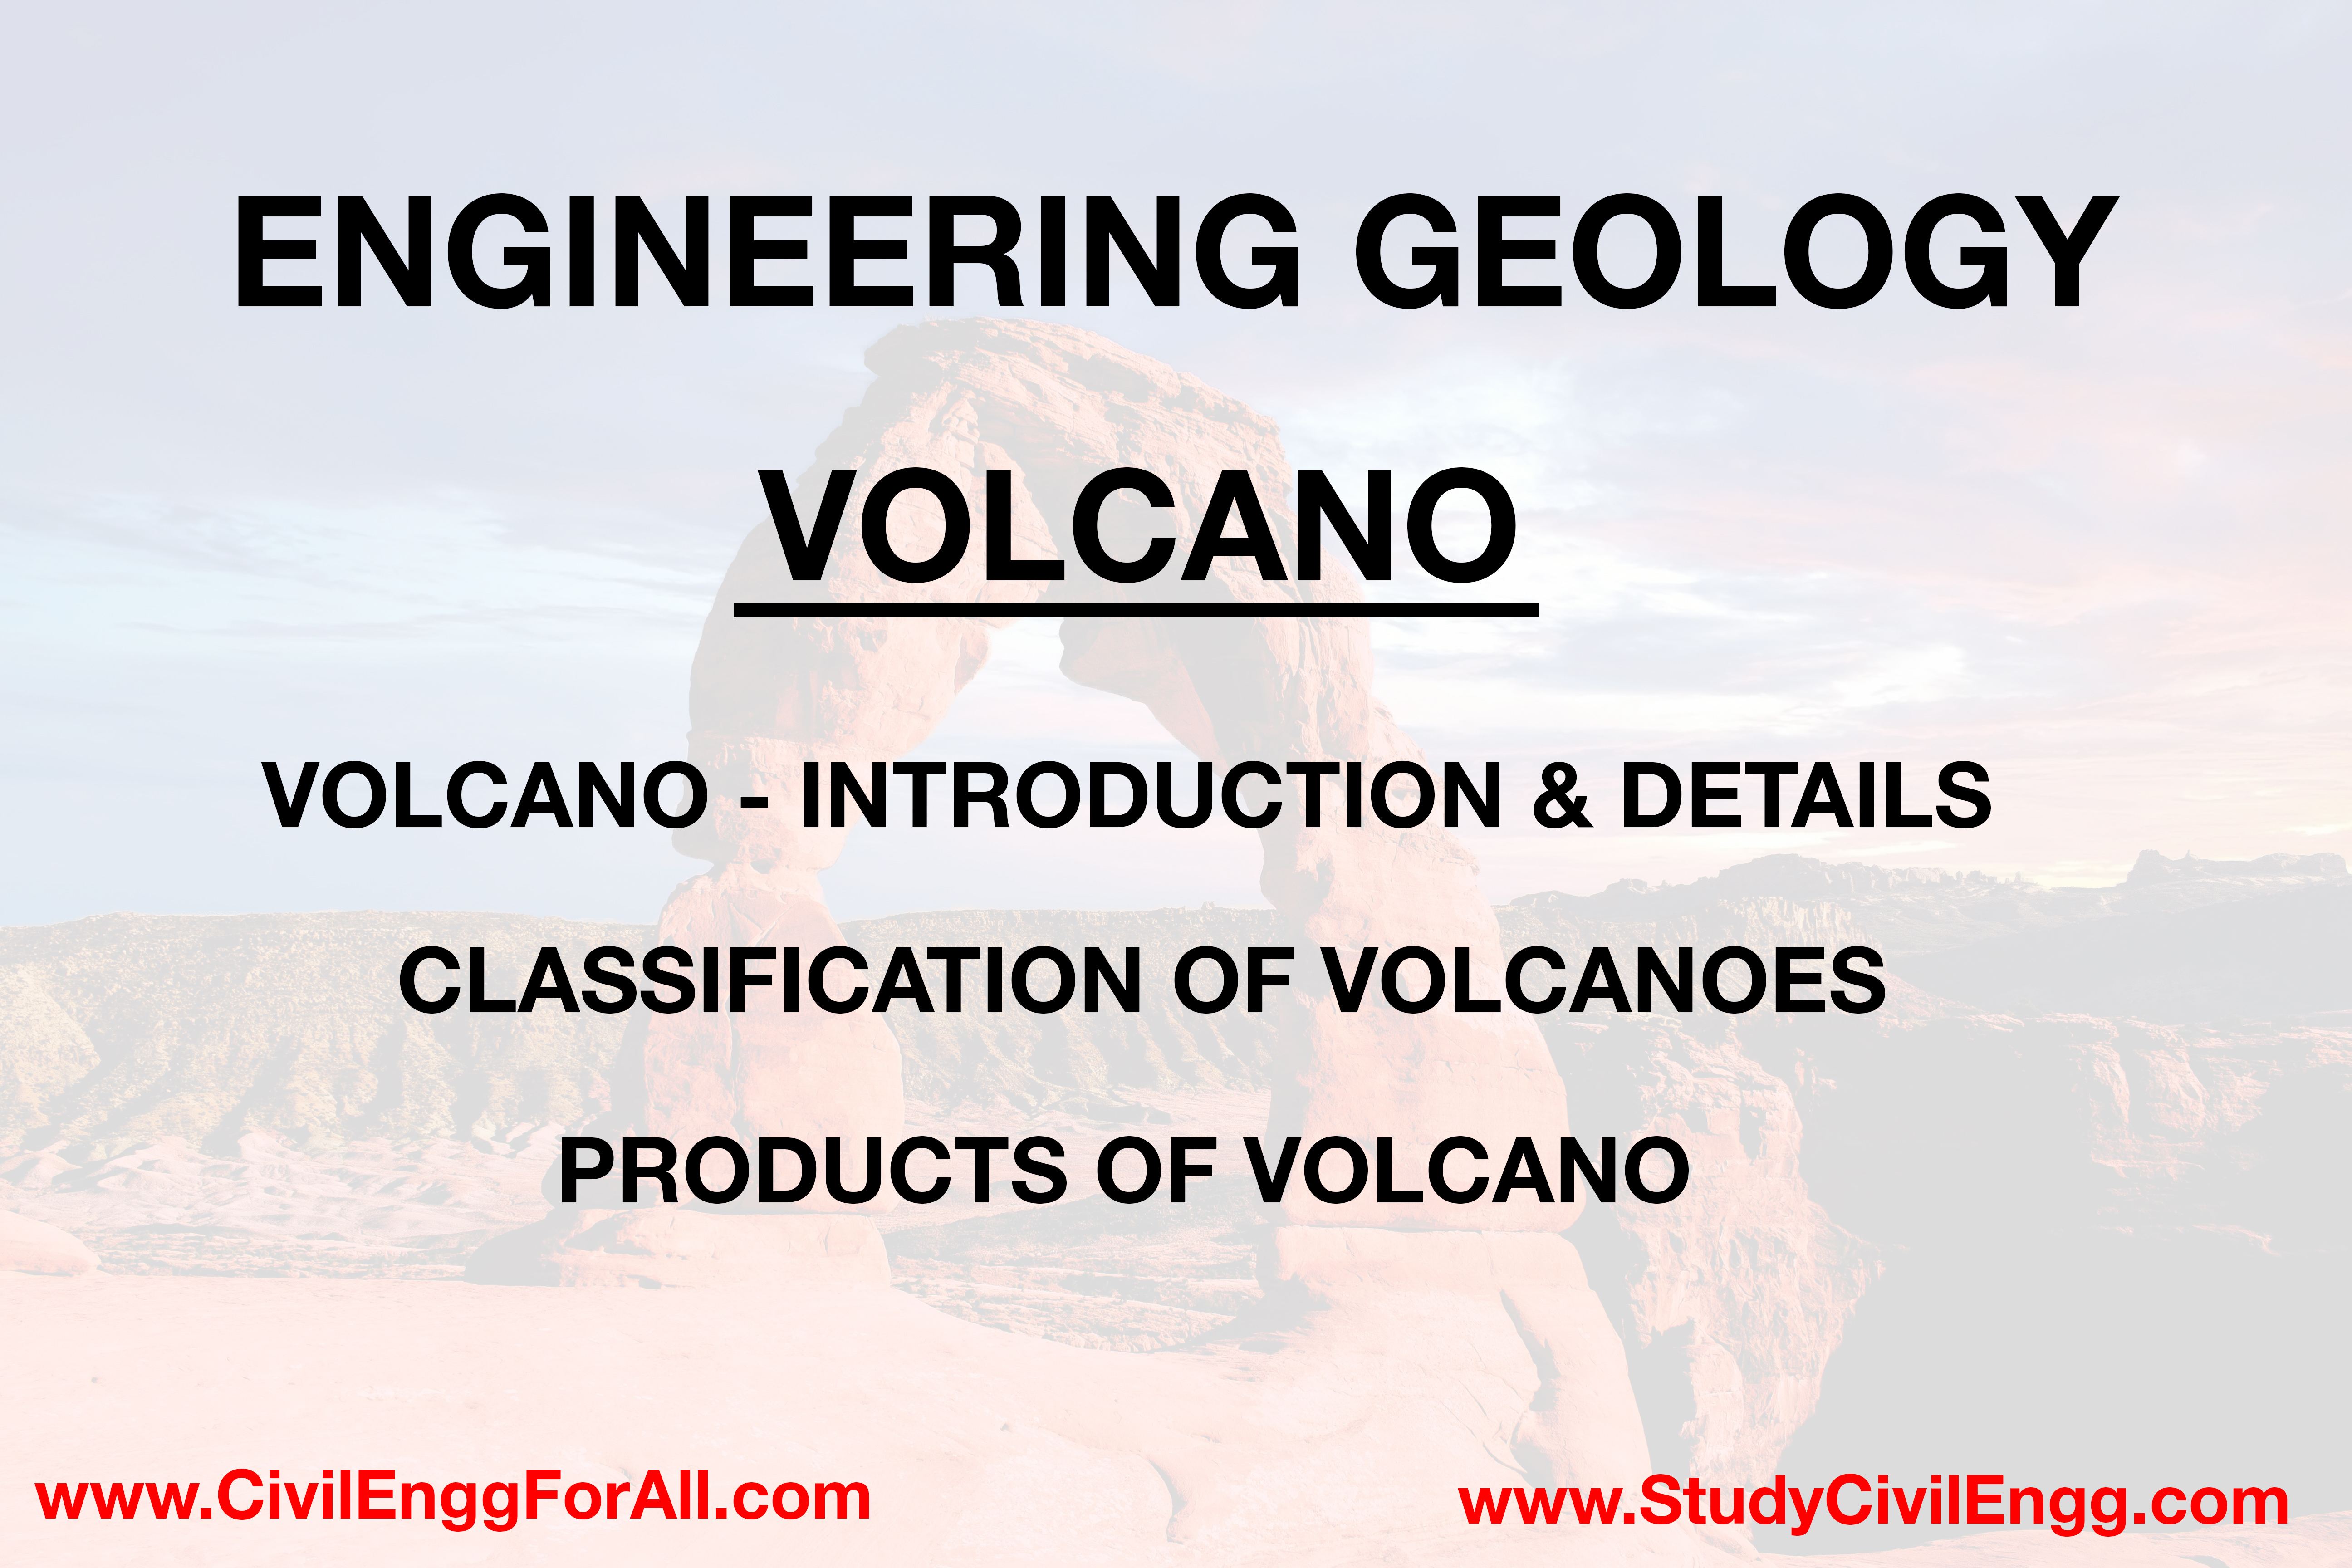 Volcano - Introduction, Classification & Products - Engineering Geology - StudyCivilEngg